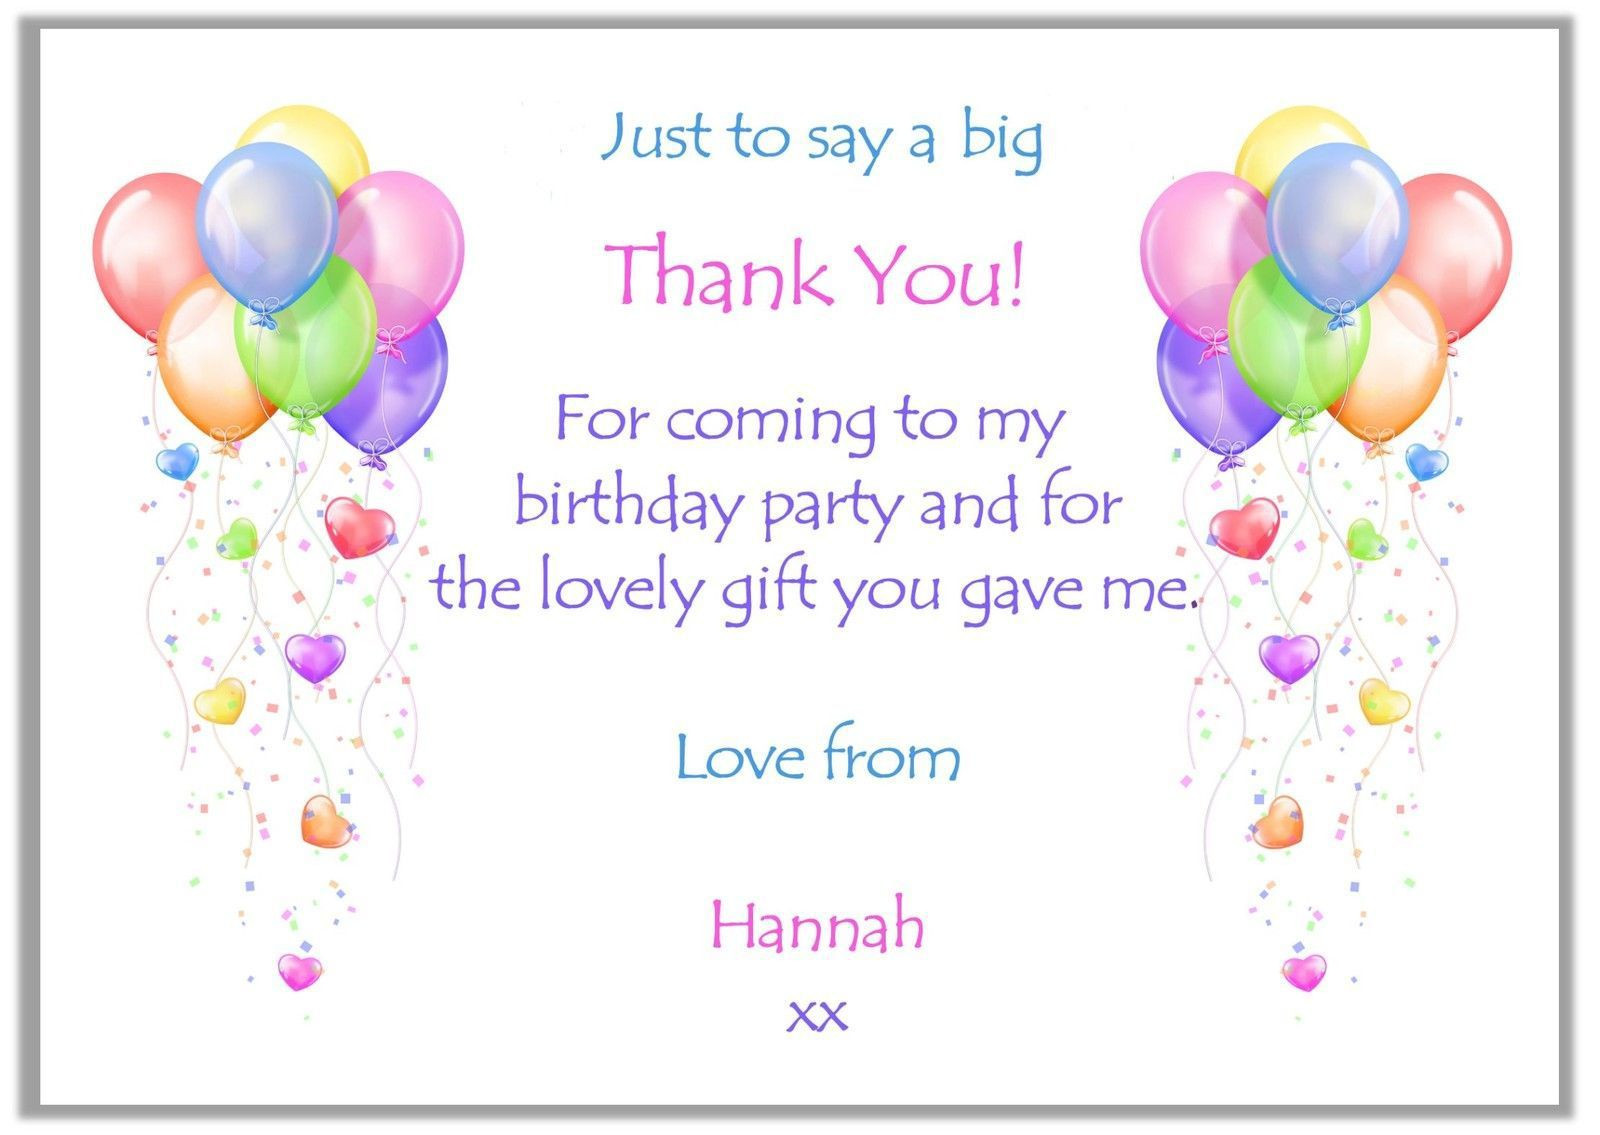 Thank You For Coming To My Birthday Party Kids
 birthday invitations Childrens birthday party invites